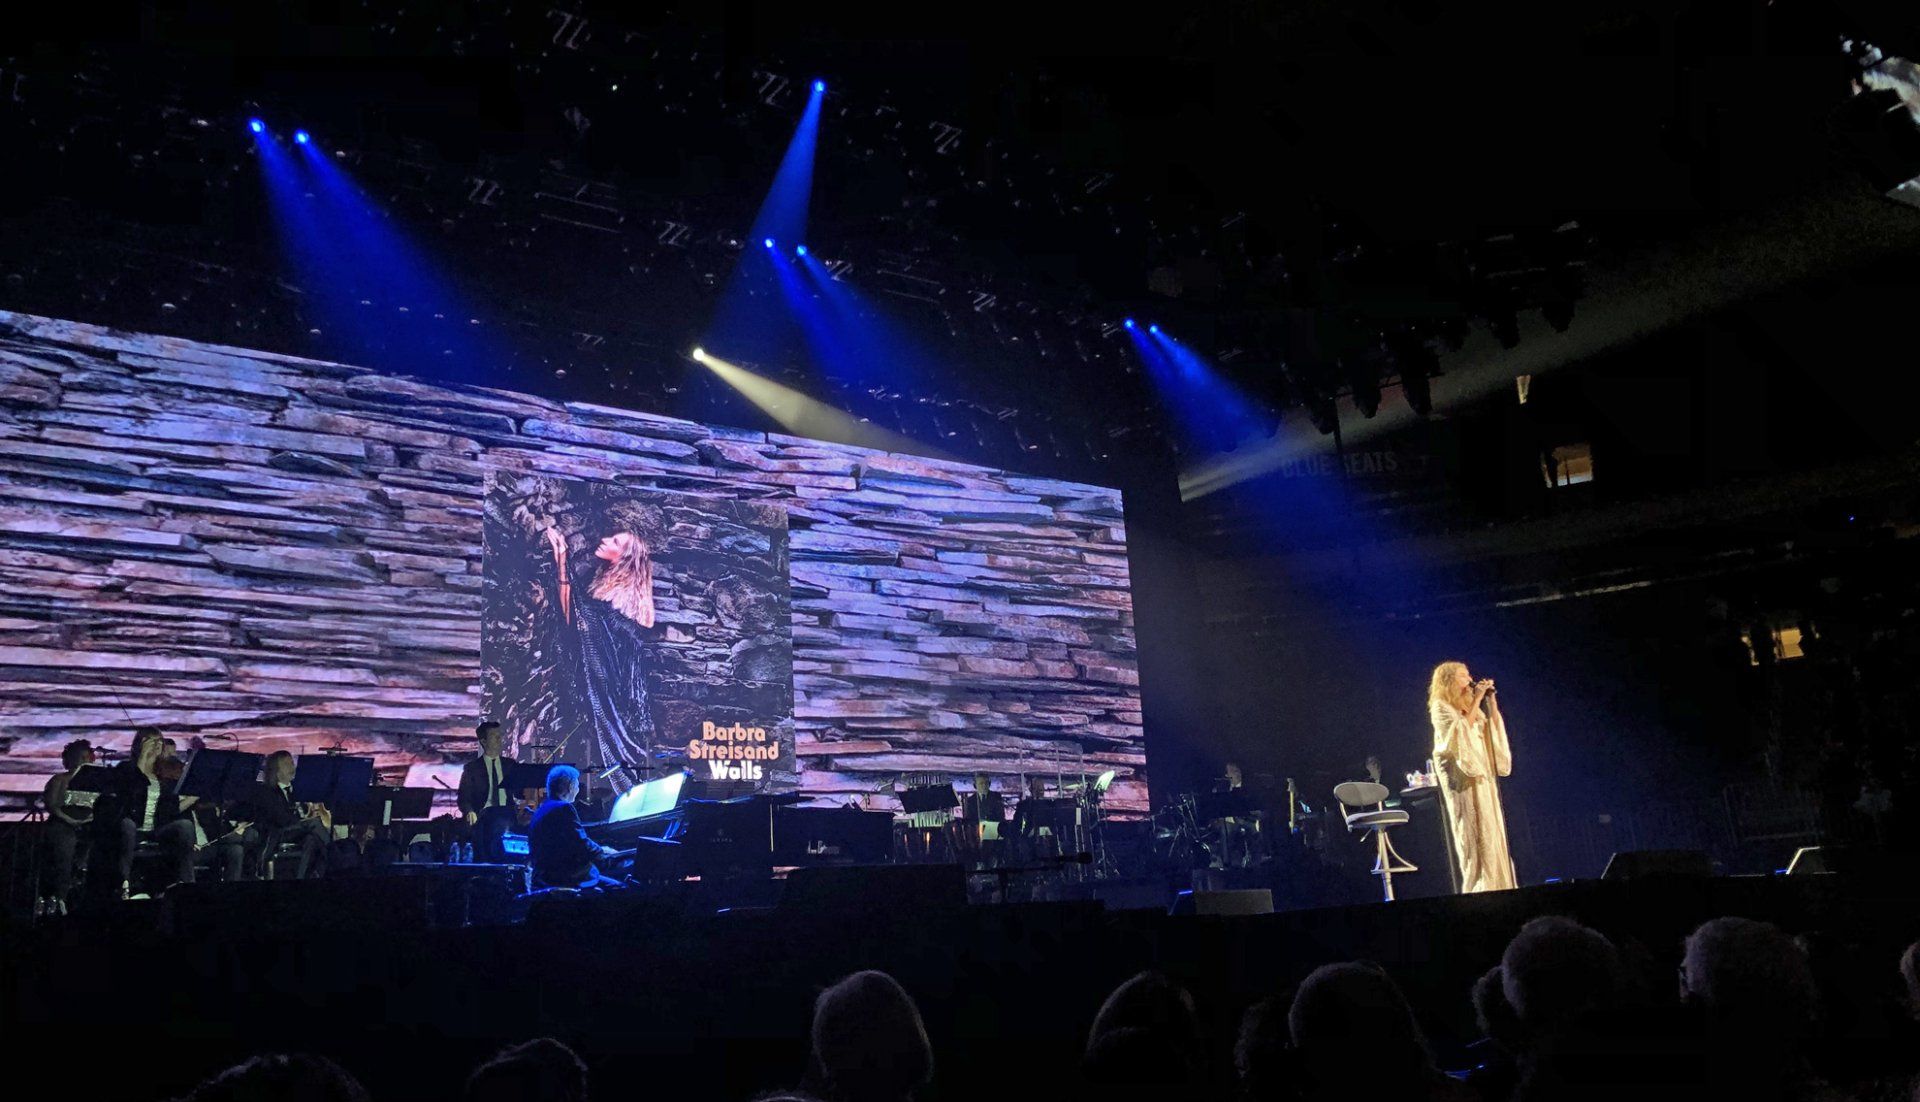 Streisand performing a song from her album WALLS at Madison Square Garden in 2019.